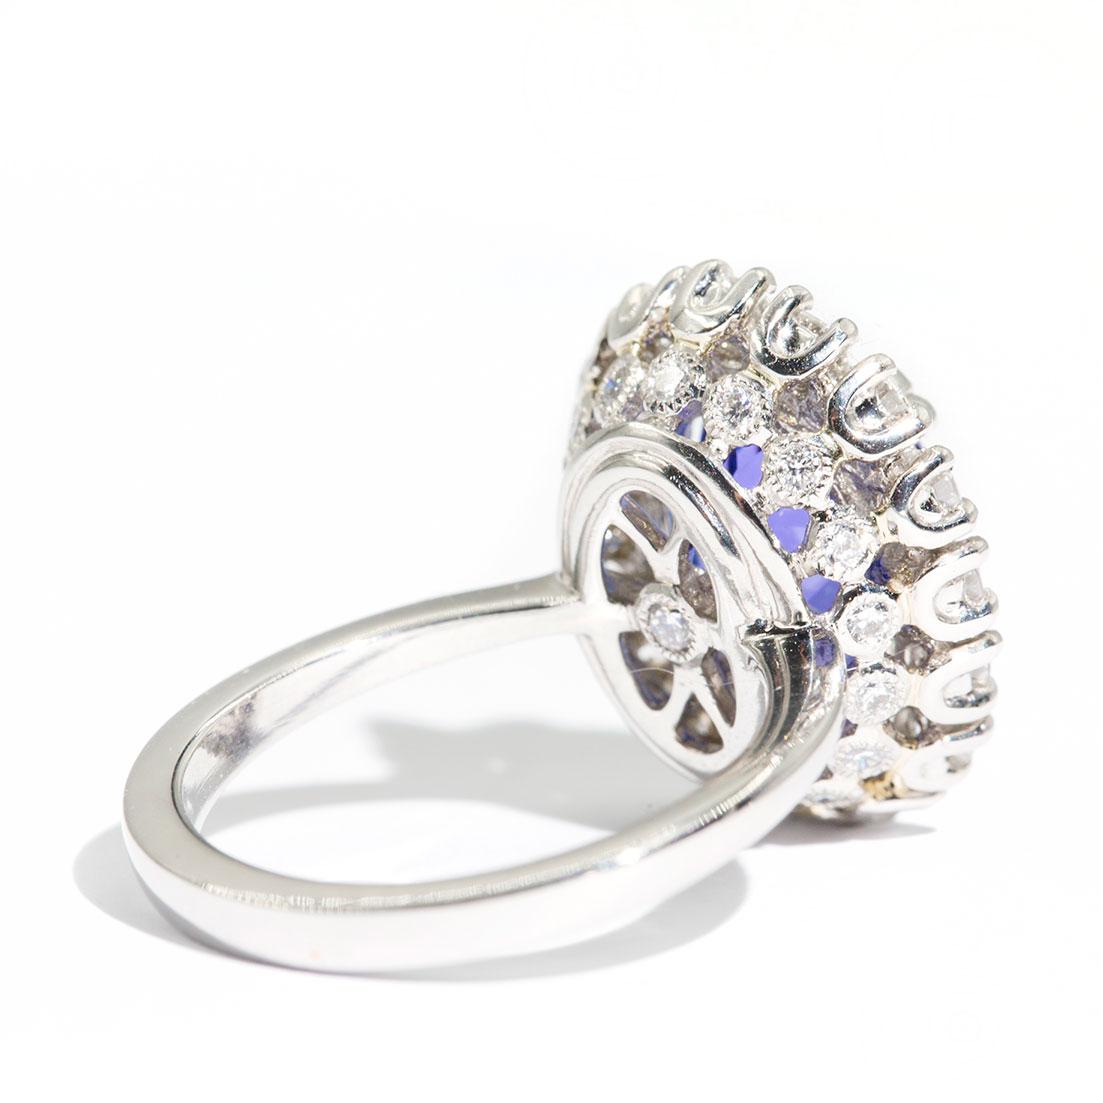 6.47 Carat Oval Flawless Tanzanite and 1.51 Carat Diamond Platinum Cocktail Ring In New Condition For Sale In Hamilton, AU